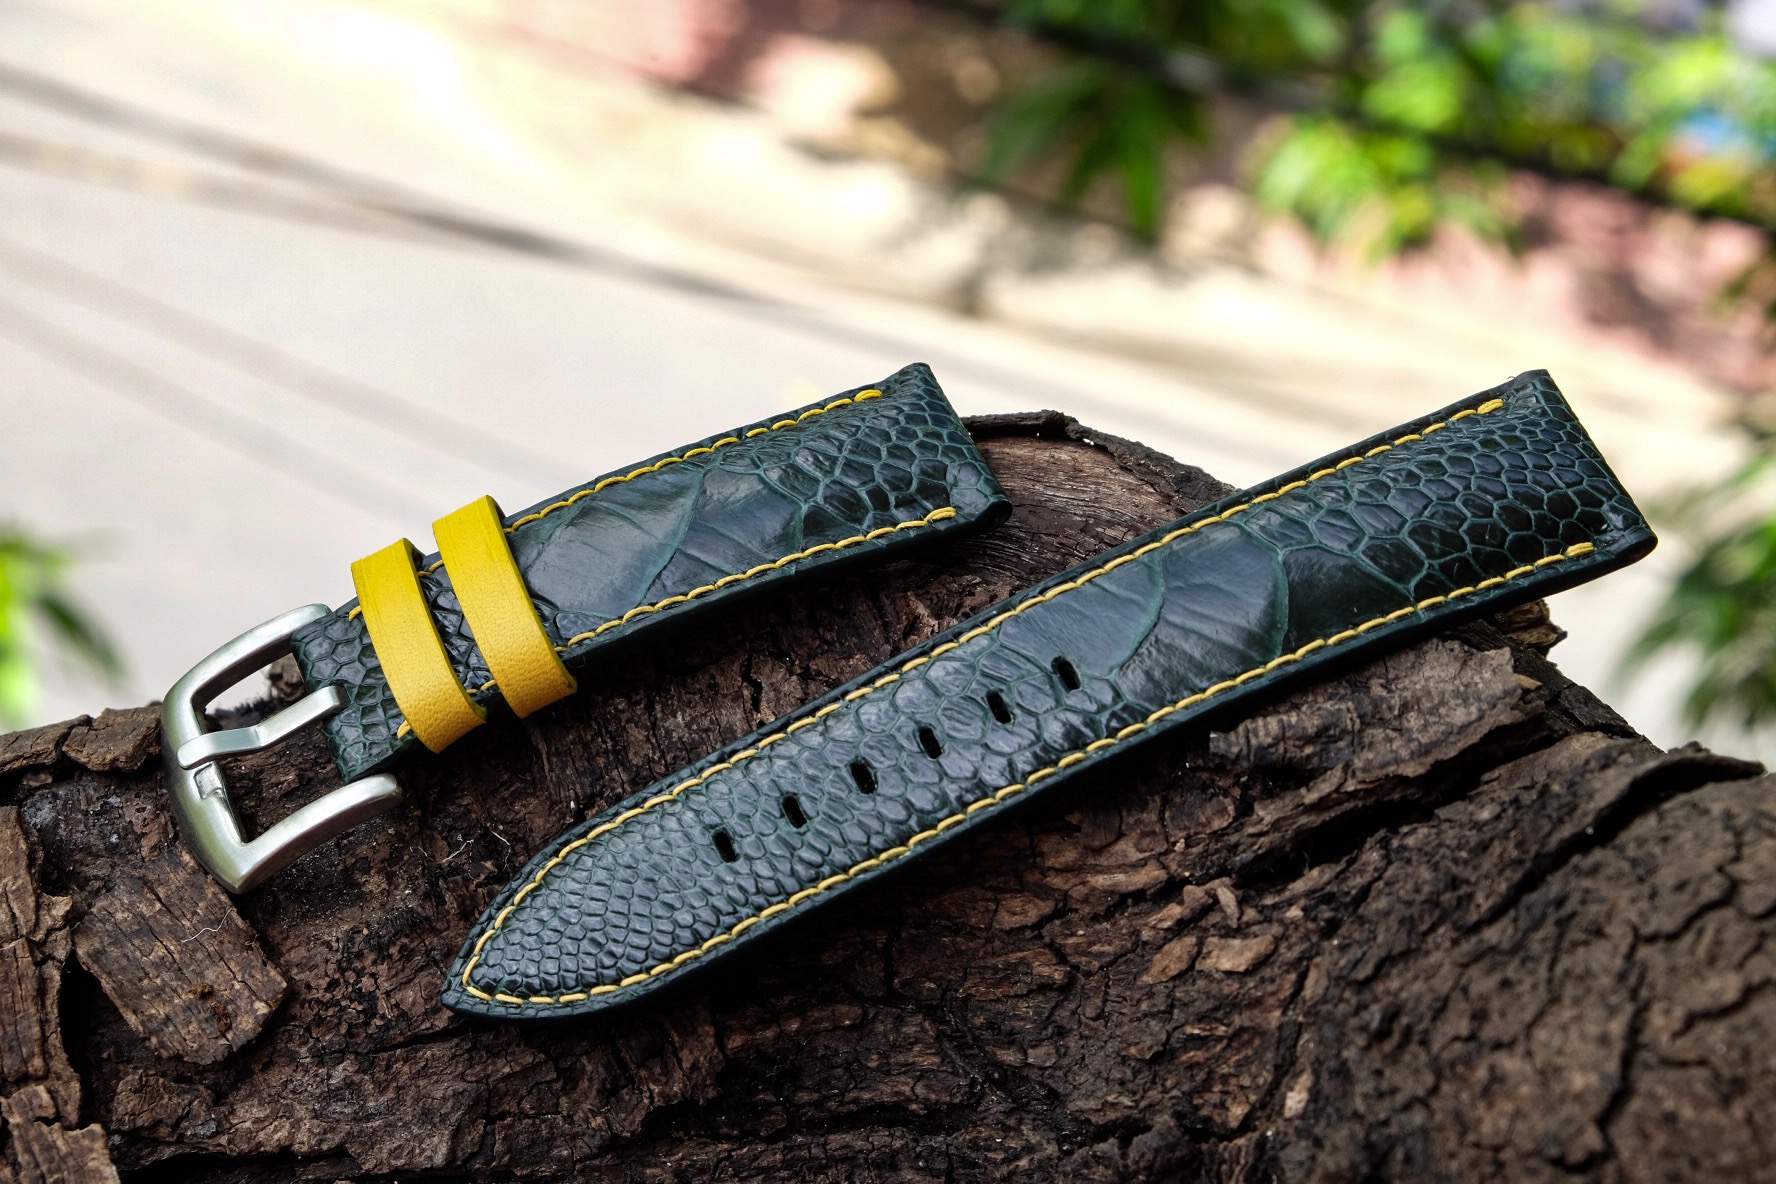 Olive green buttero leather watch strap HDCLE67